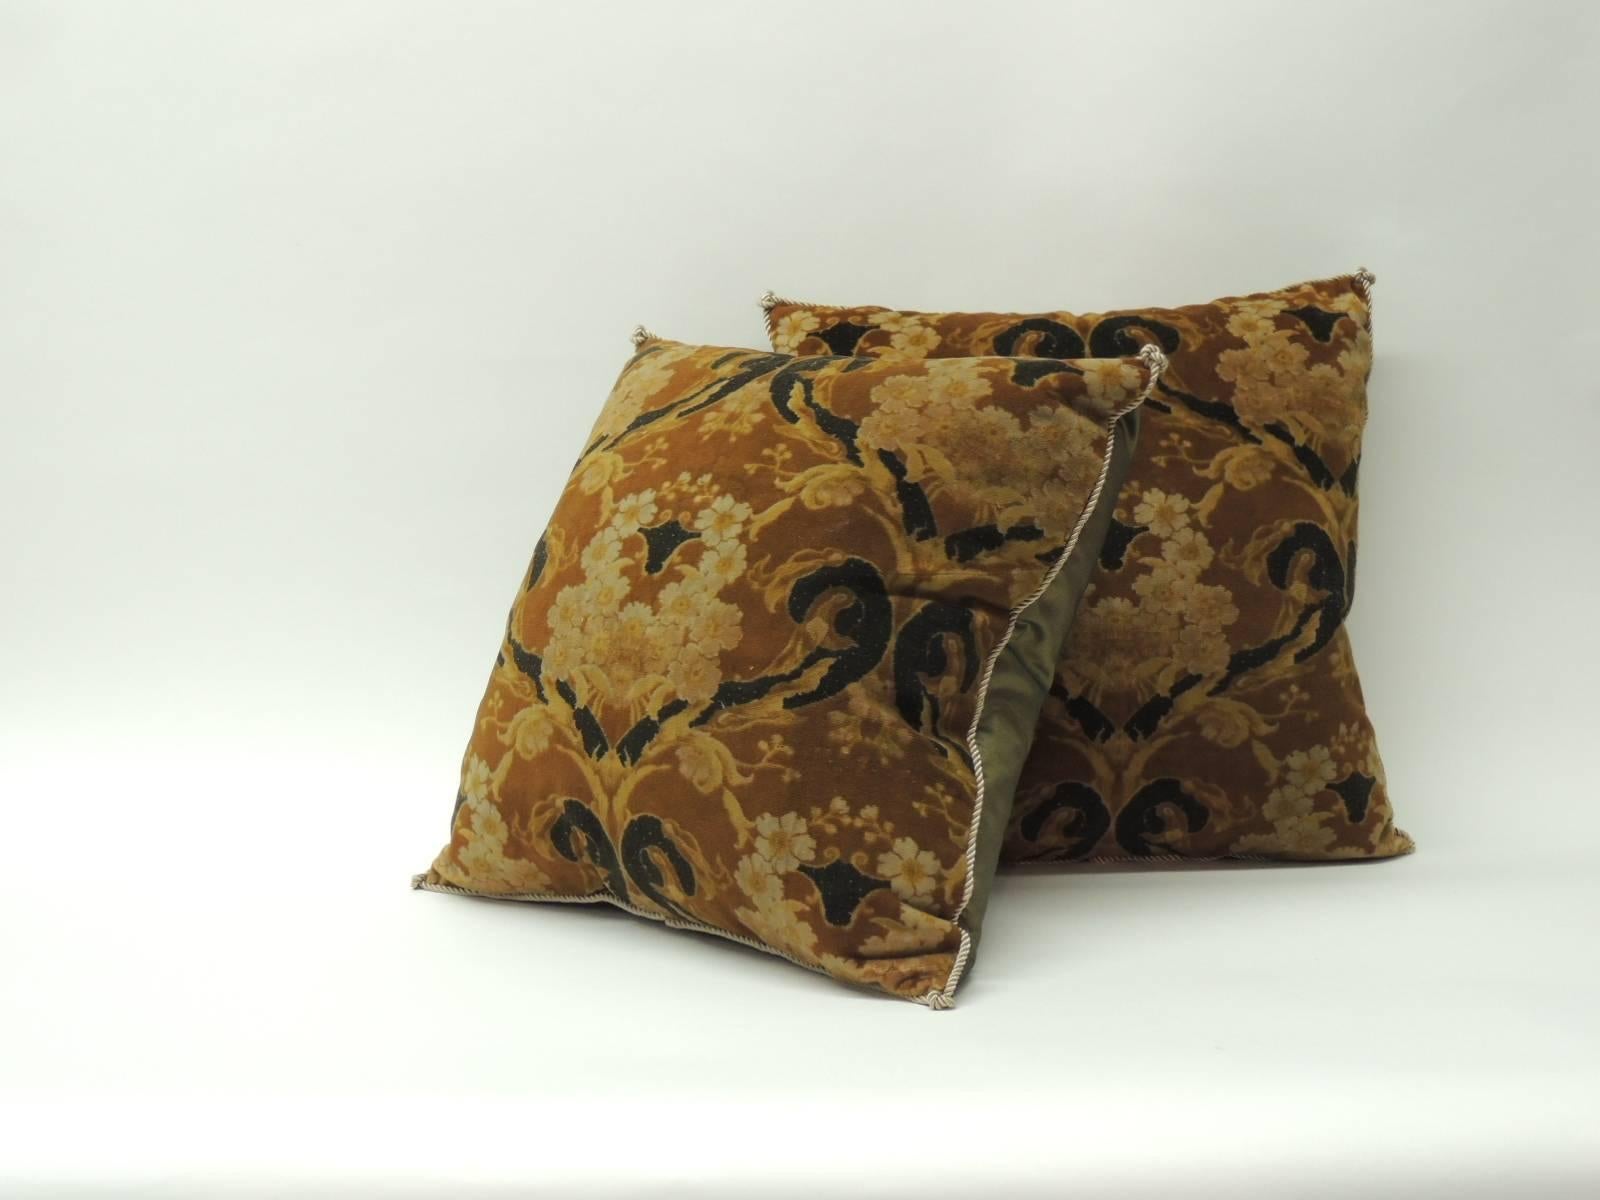 Pair of vintage Art Noveau style cotton velvet bolster decorative pillows. Art Noveau style refers to “a style of decorative art, architecture, and design prominent in western Europe and the US from about 1890 until World War I and characterized by